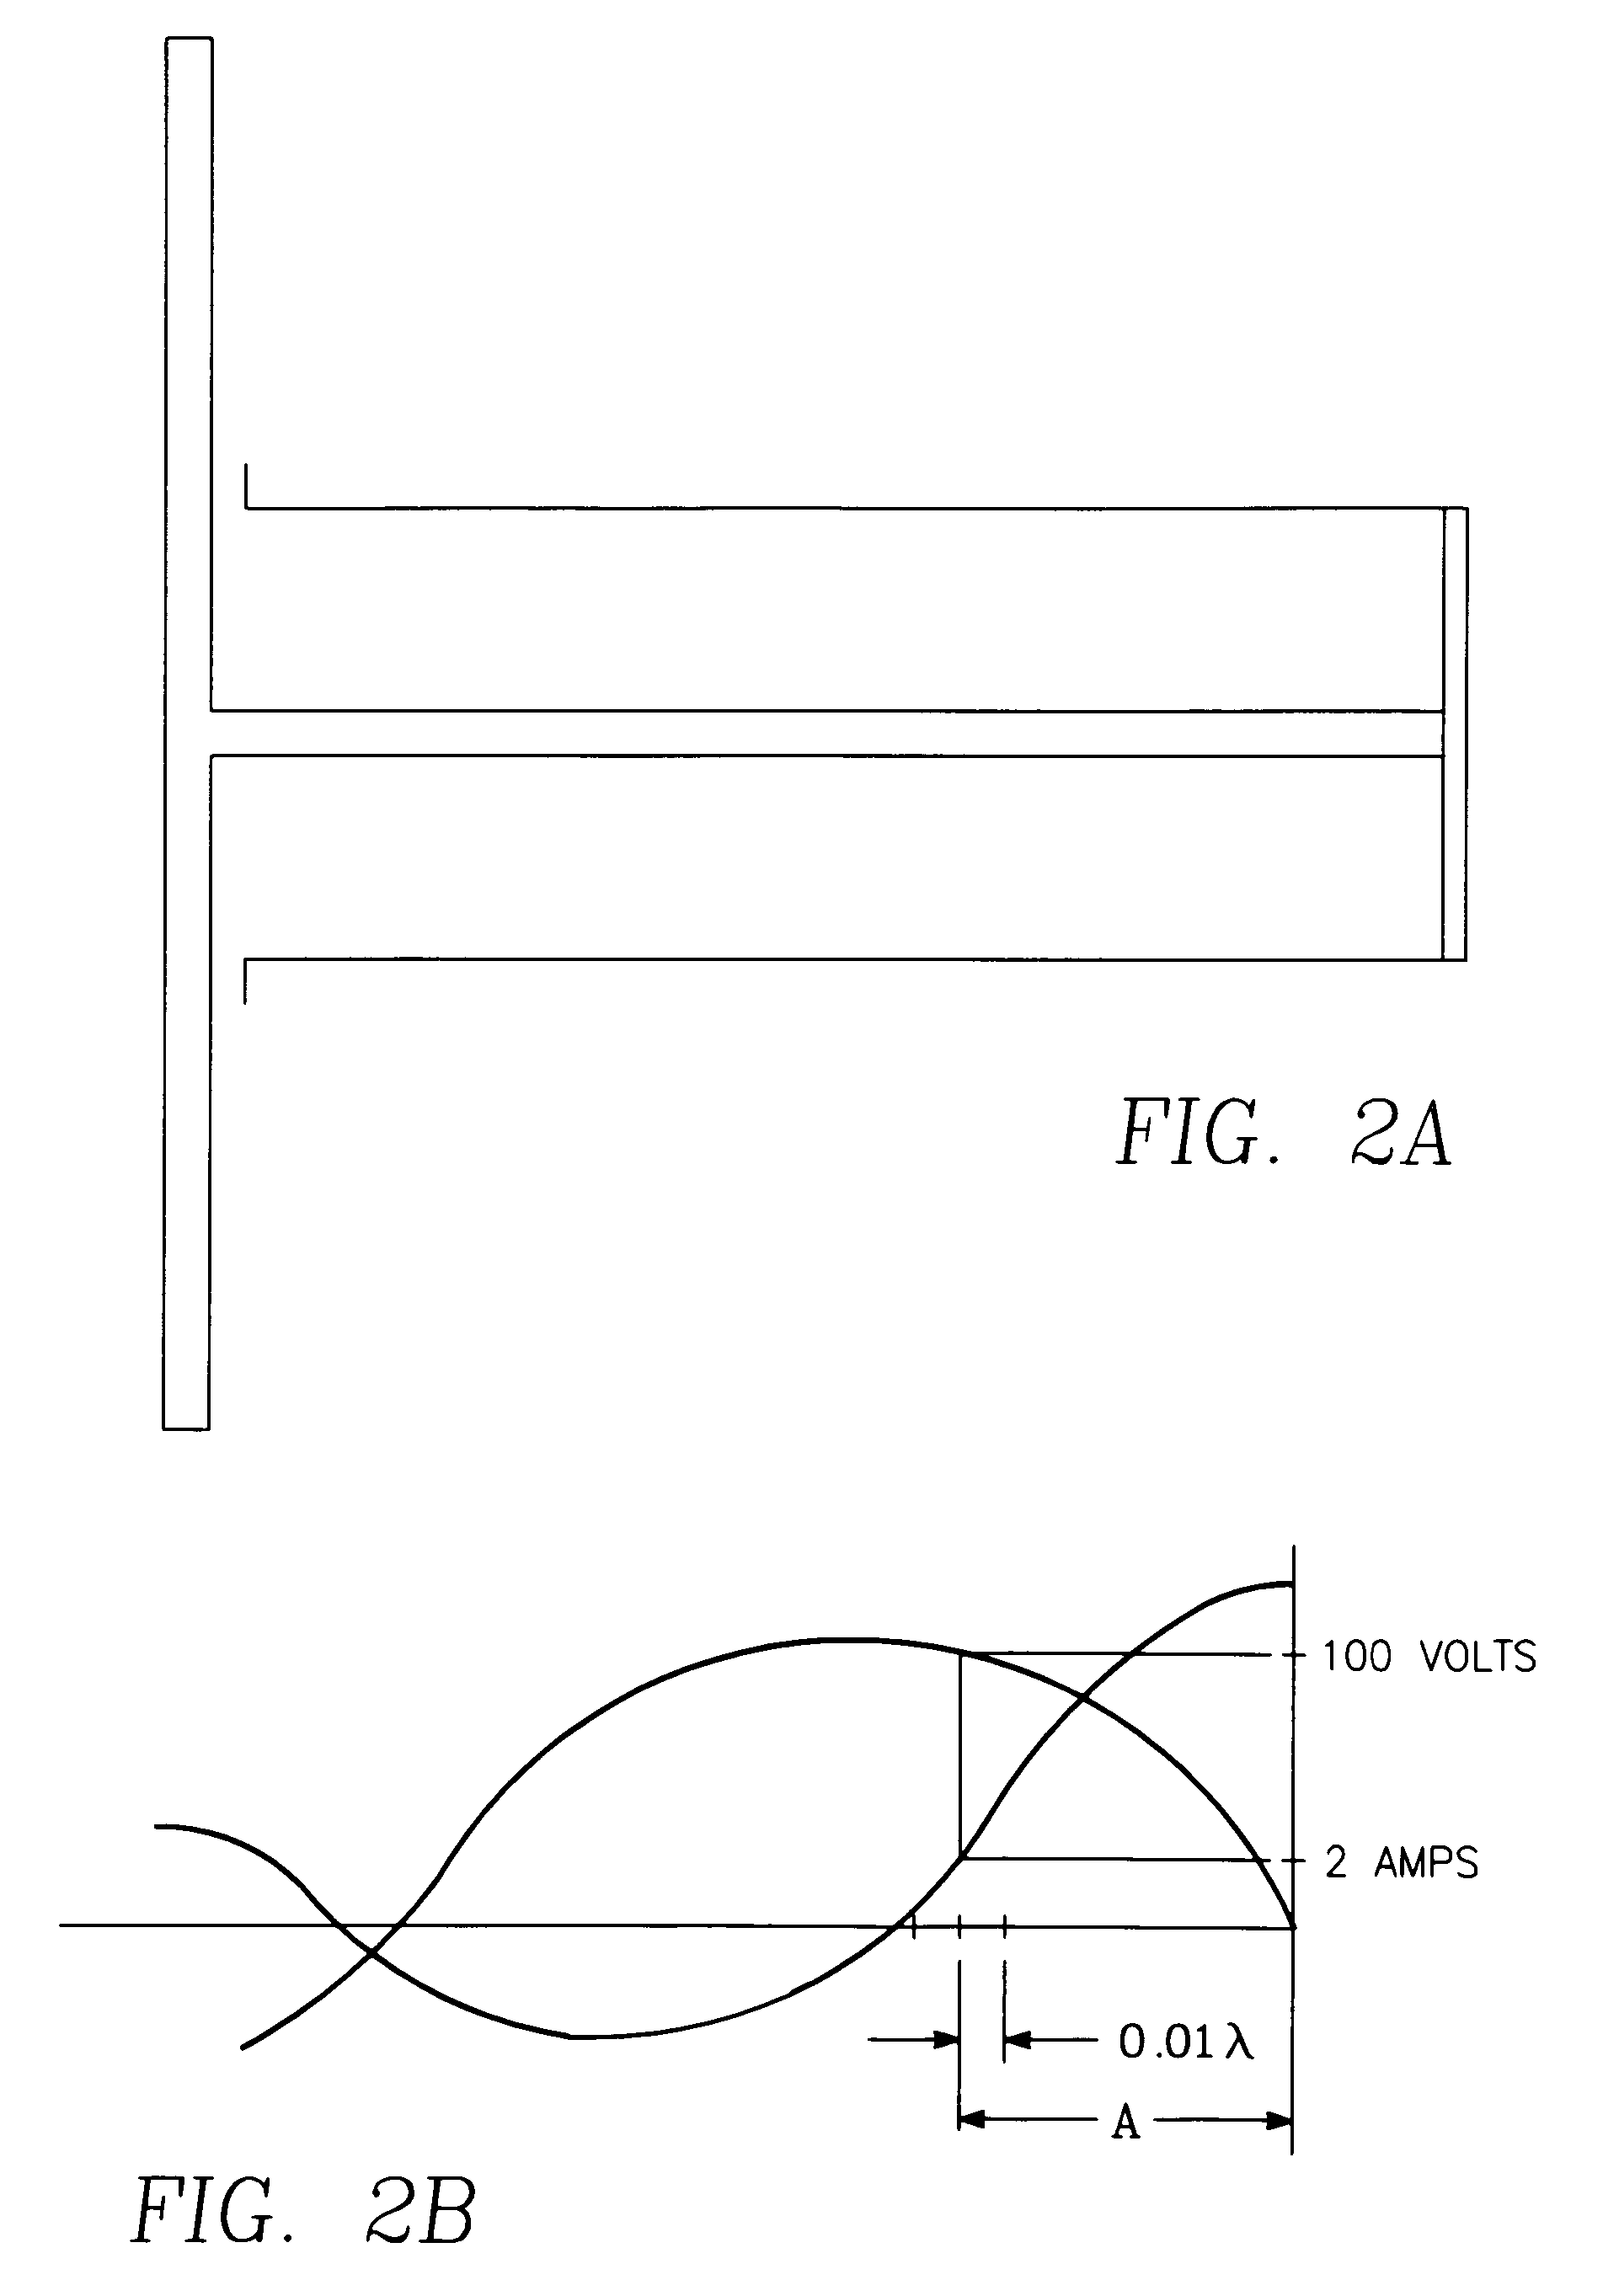 Plasma reactor overhead source power electrode with low arcing tendency, cylindrical gas outlets and shaped surface